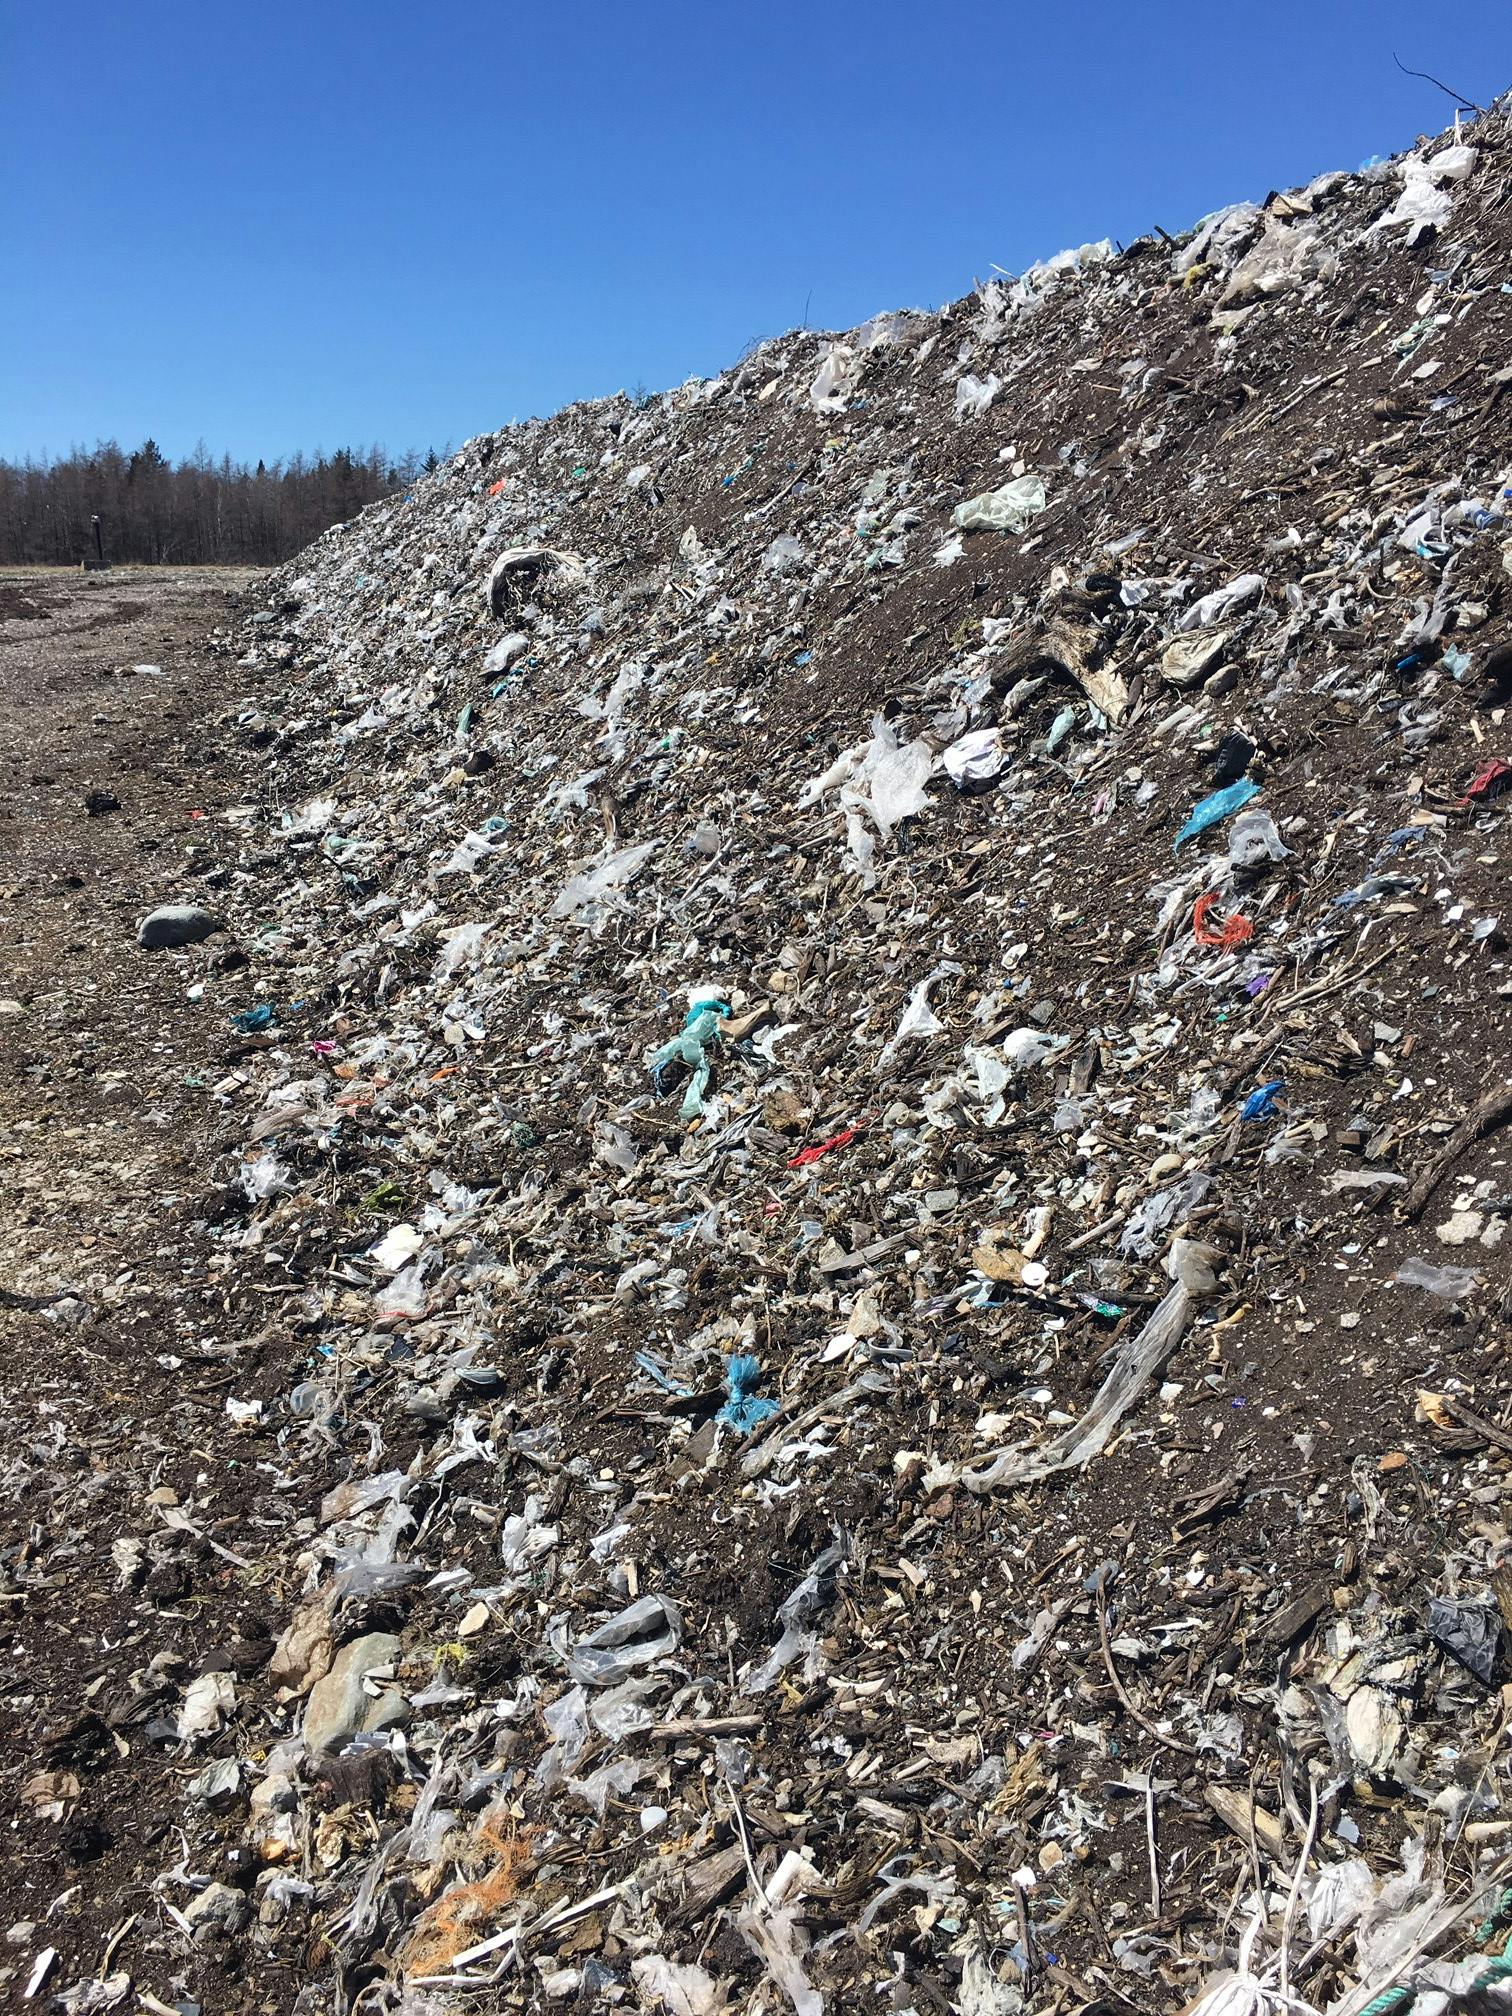 Plastic left over in curing piles